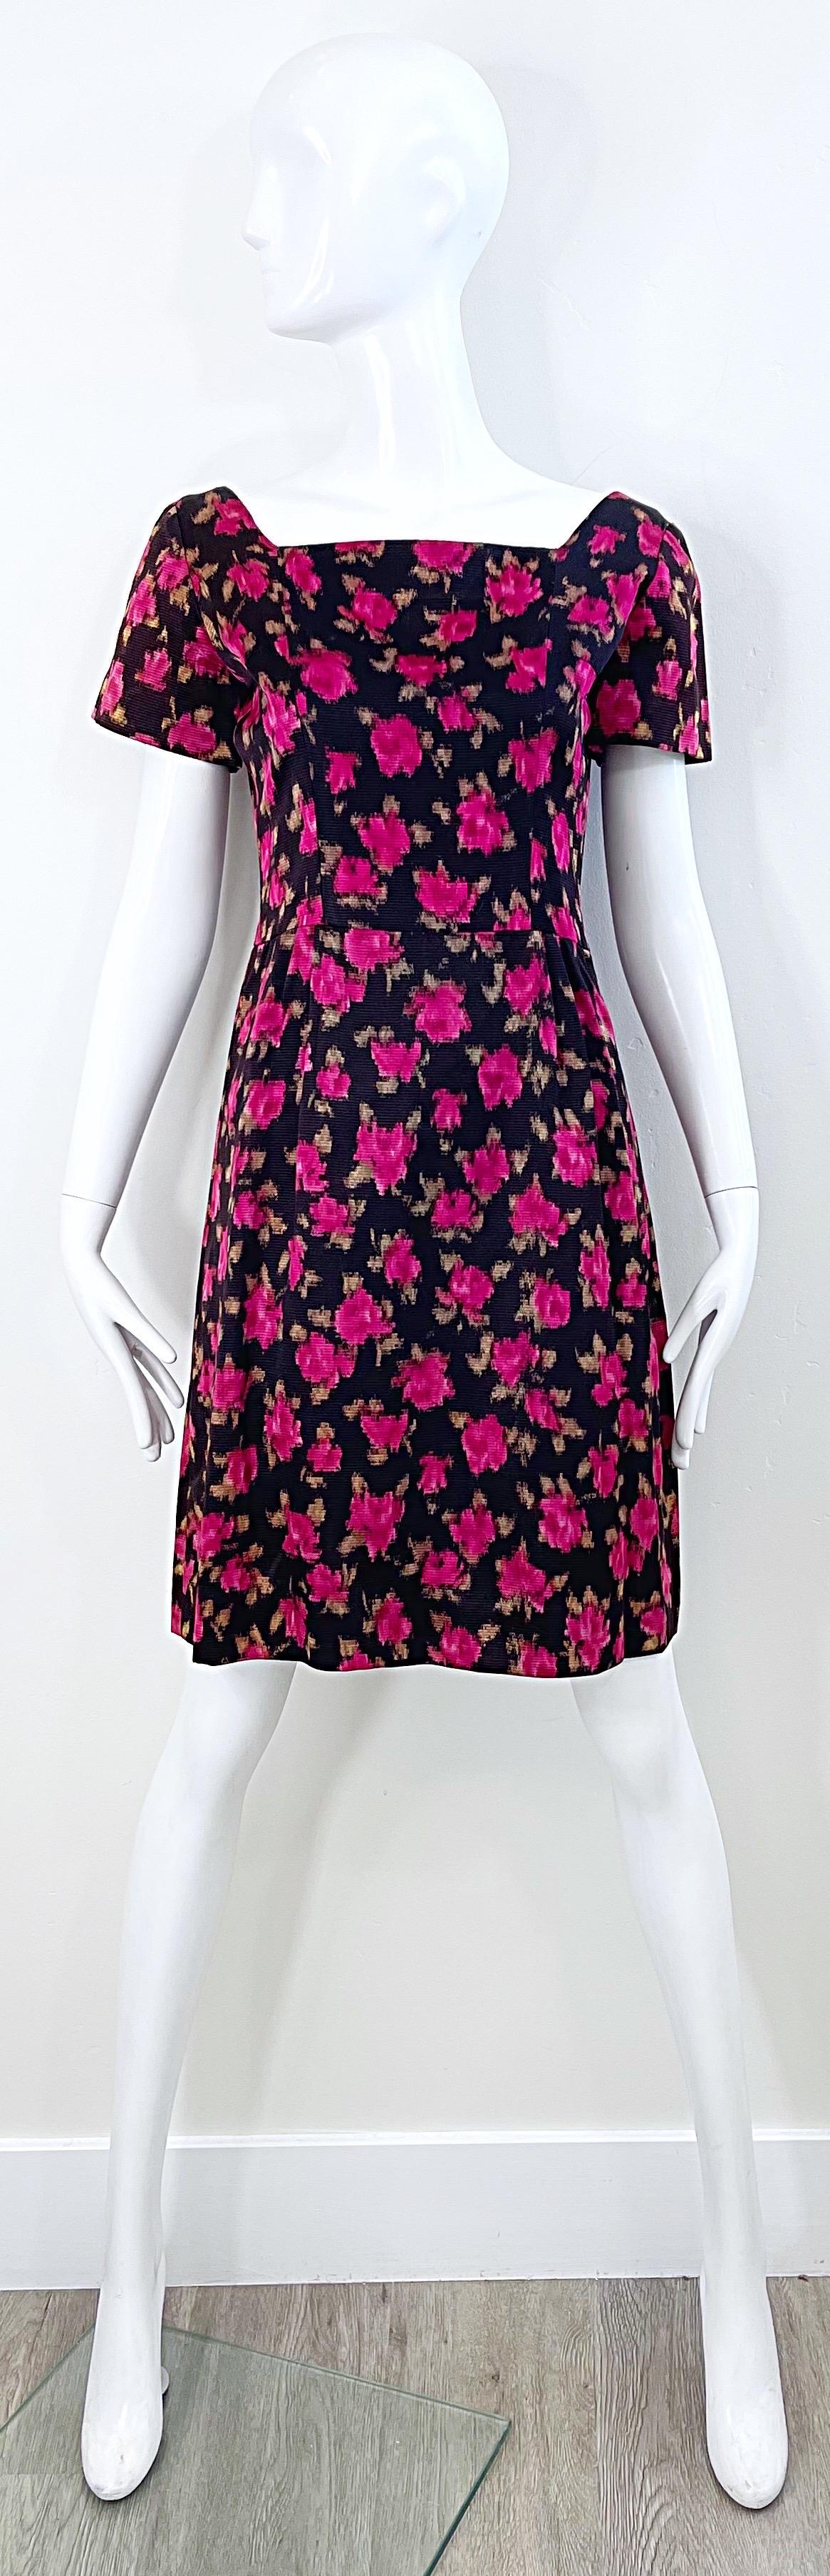 Beautiful vintage 60s SUSAN SMALL of London black and pink watercolor rose print silk dress. Features a tailored bodice with a slightly fuller skirt. Hidden zipper up the back with hook-and-eye closure. Great belted or alone, for any day or evening